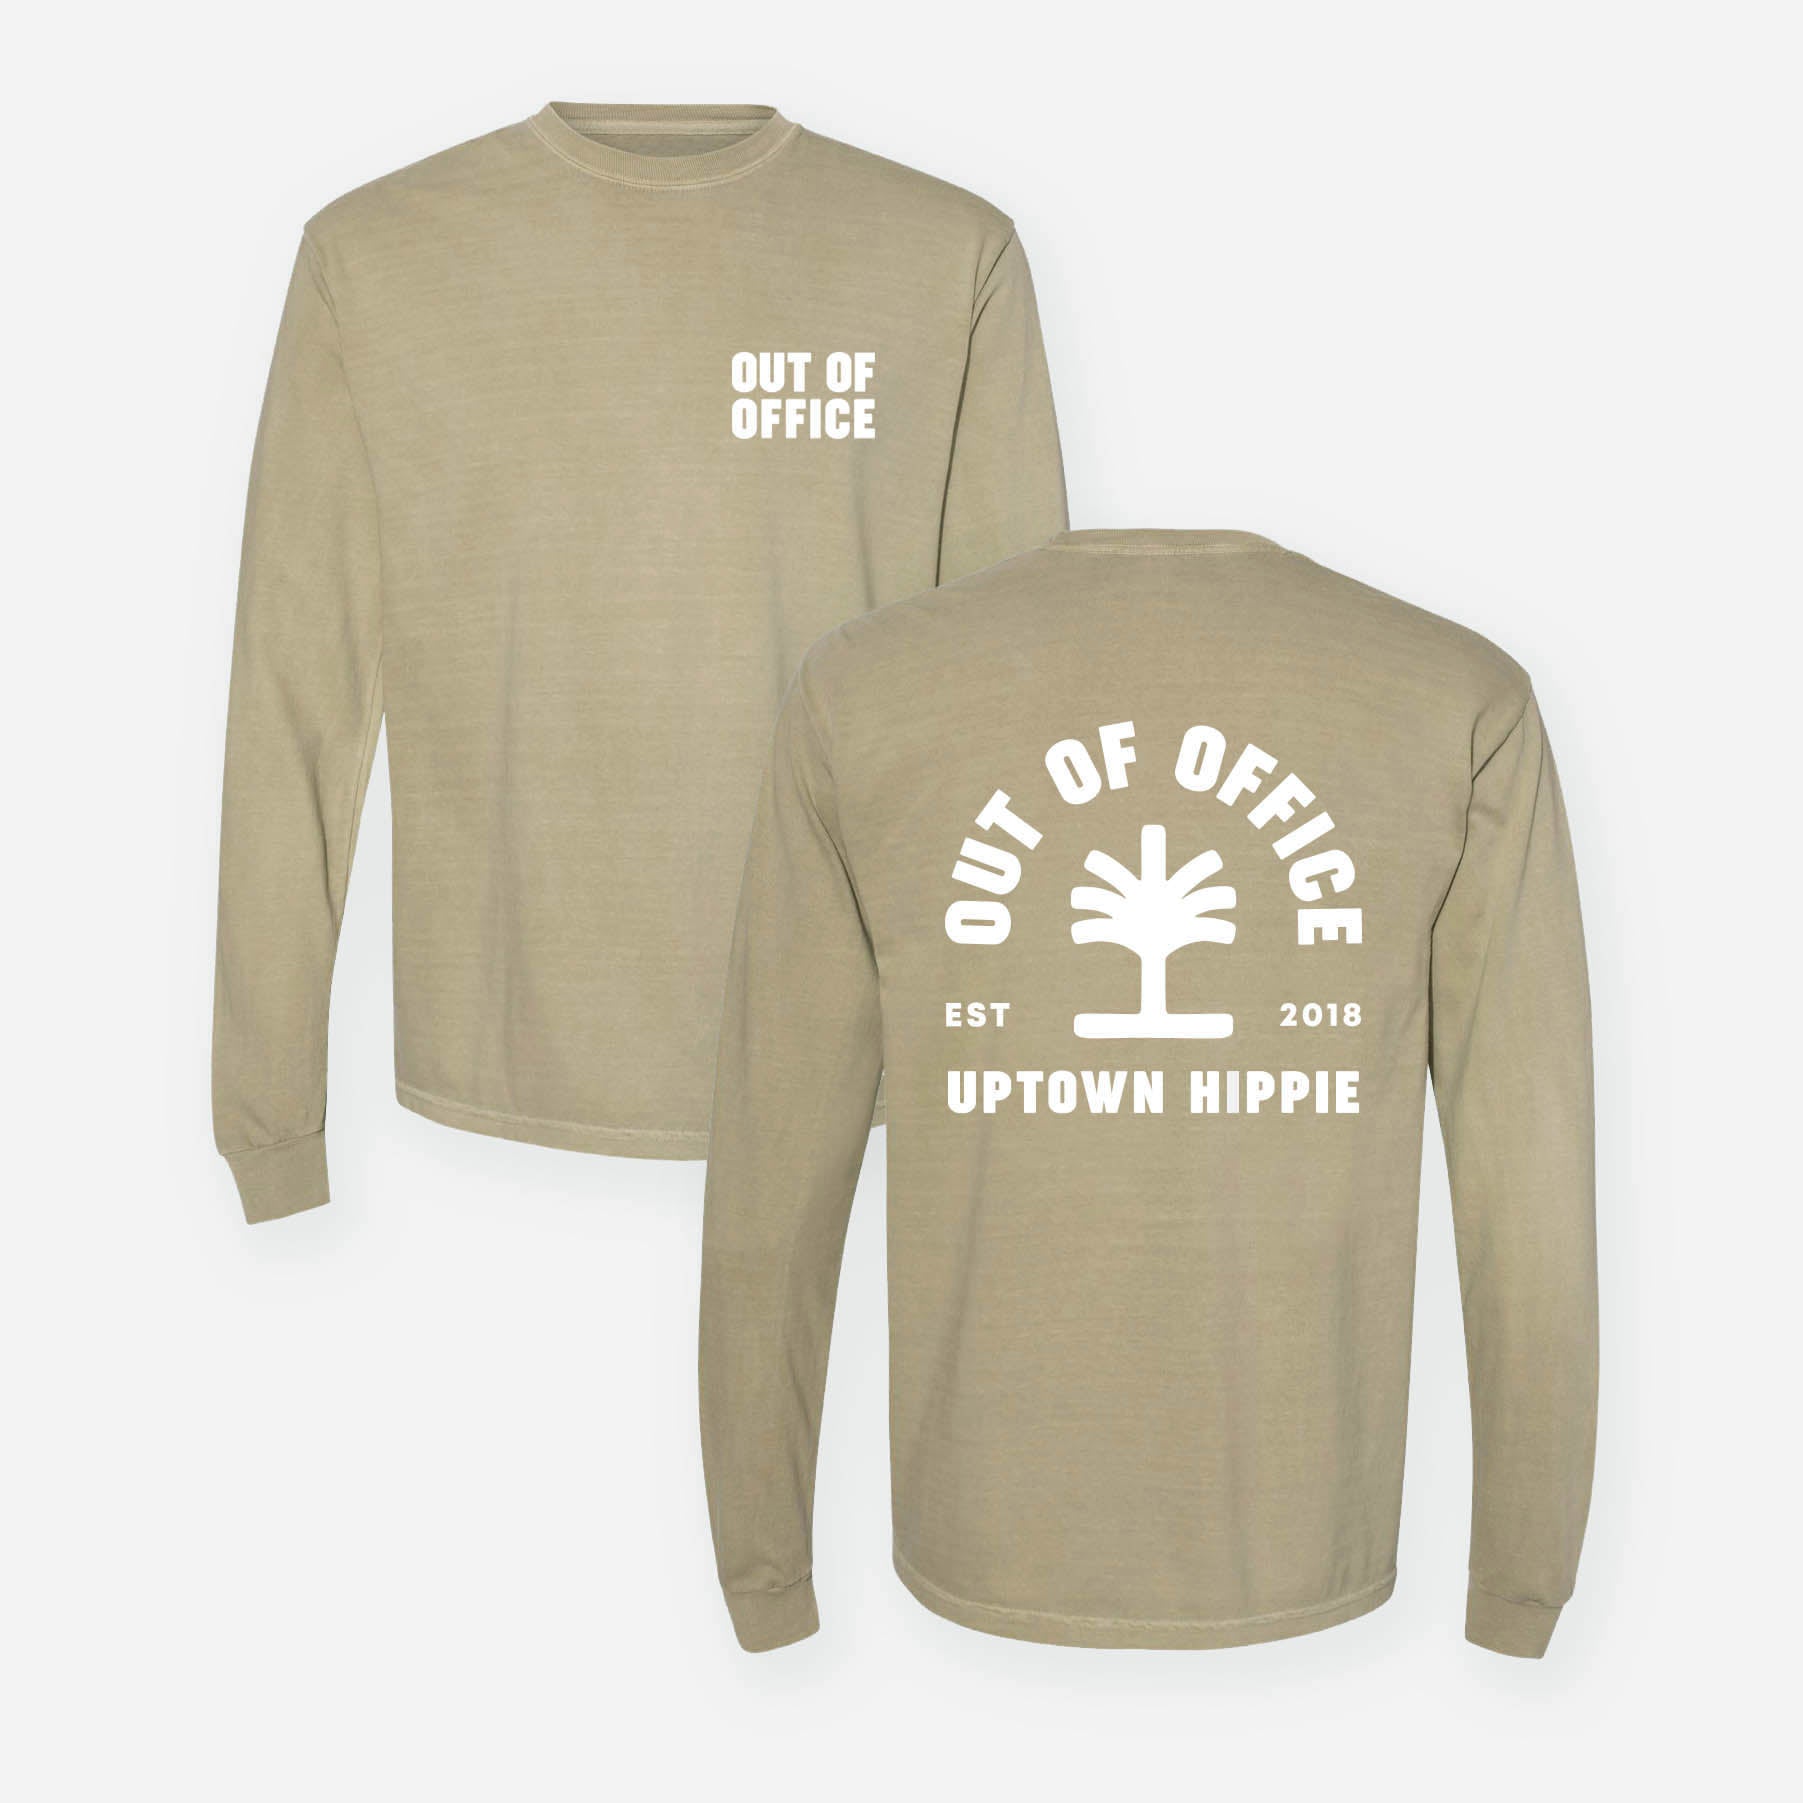 Out of Office Long Sleeve Shirt (Army Khaki)